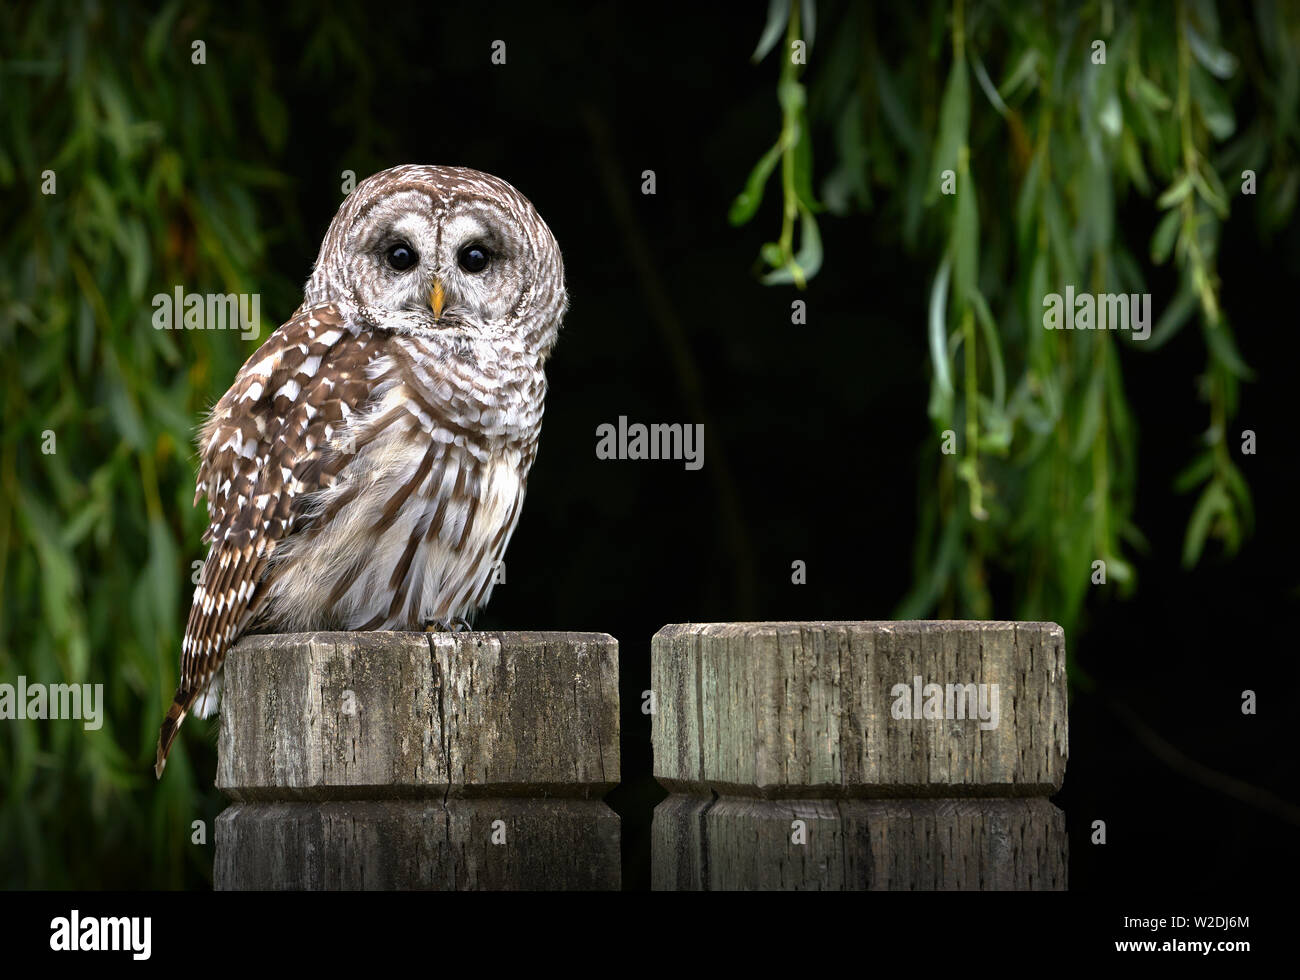 Barred Owl on Post. A Barred Owl watching from atop a fence post. Stock Photo